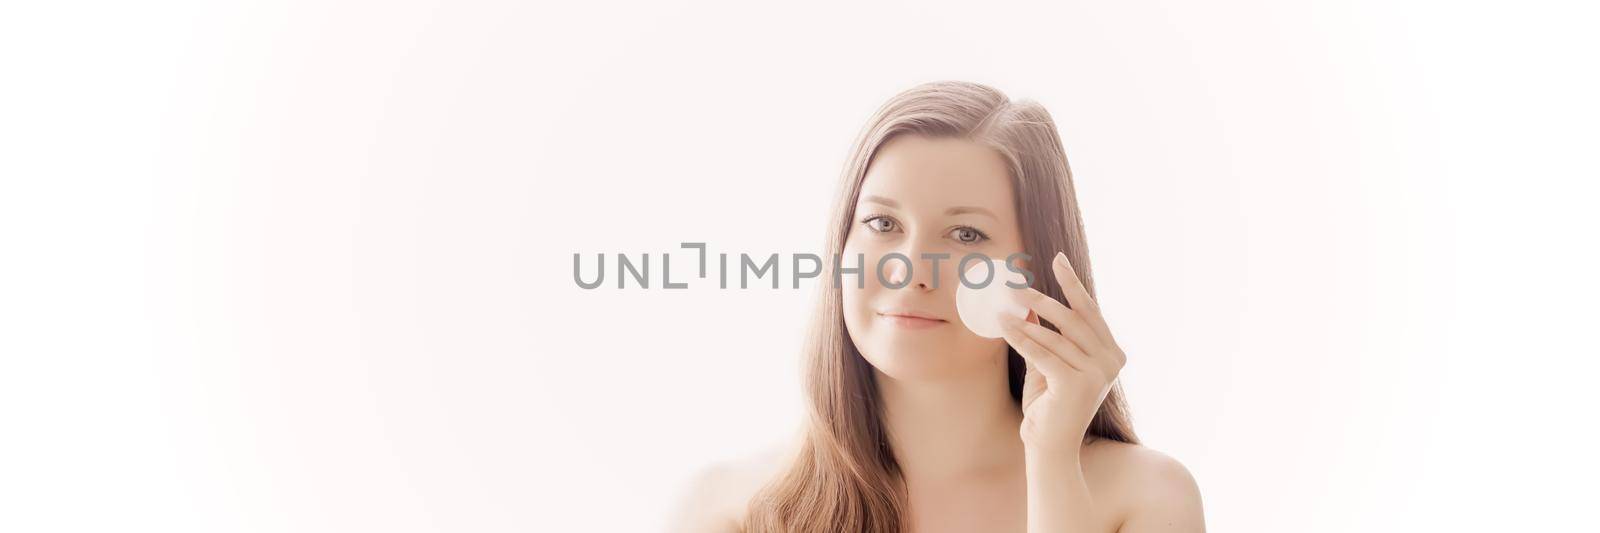 Beautiful woman with cotton pad, perfect skin and shiny hair as make-up, health and wellness concept. Face portrait of young female model for skincare cosmetics and luxury beauty ad design.